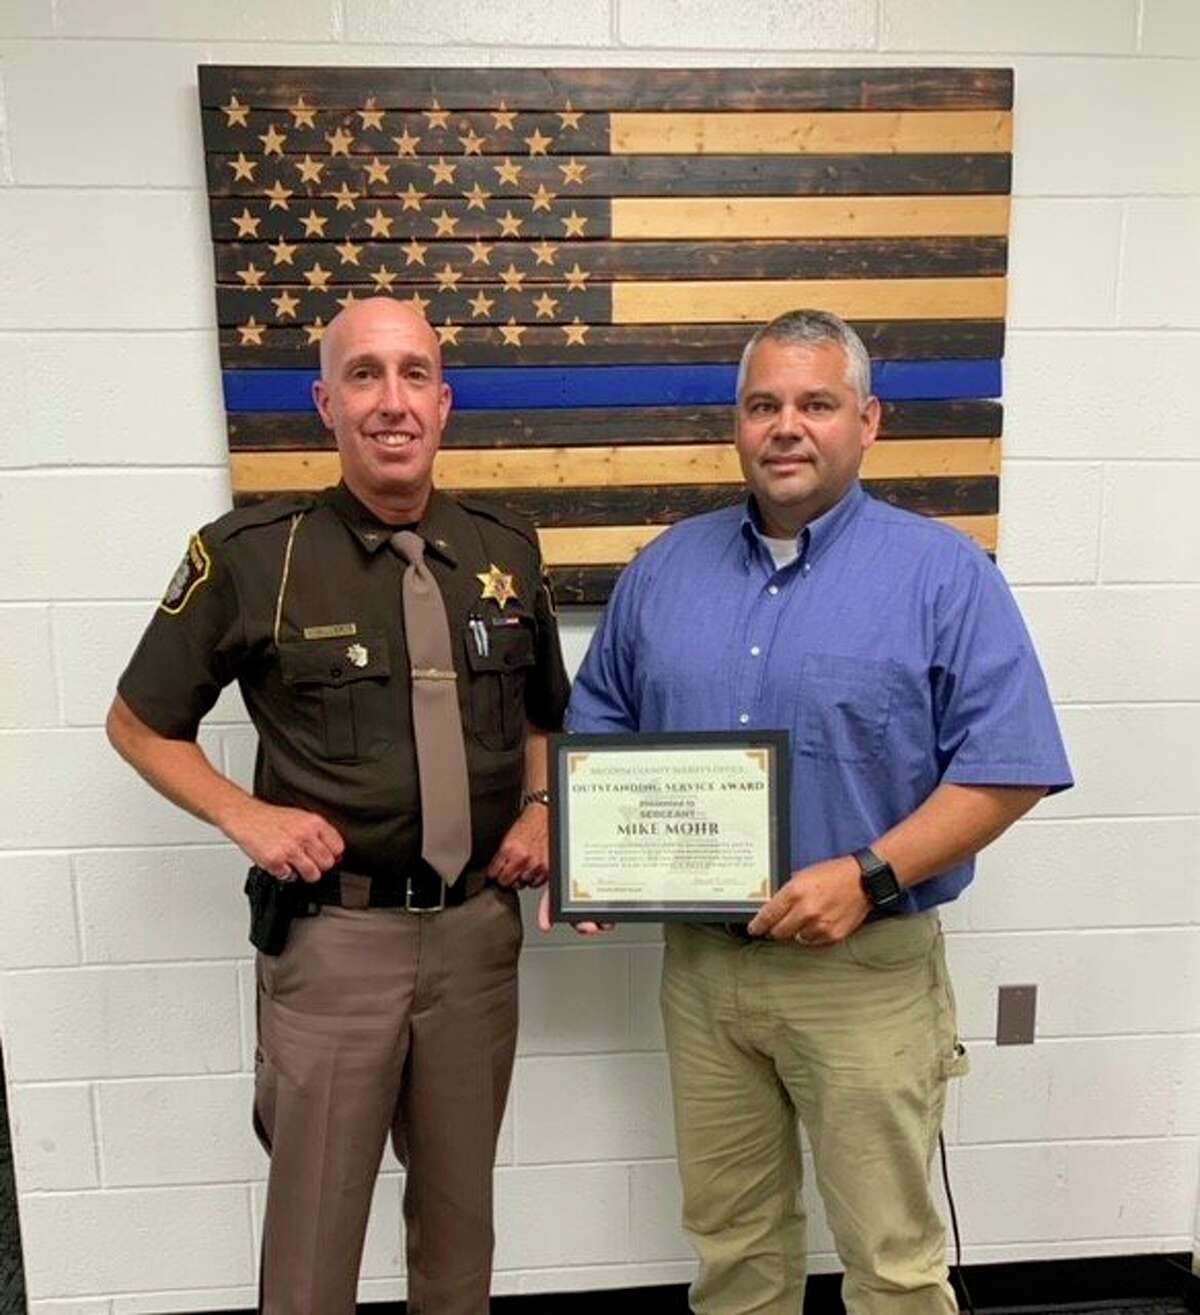 Sgt. Mike Mohr (right), of the Mecosta County Sheriff's Office, received the Outstanding Service Award from Sheriff Brian Miller (left). (Photo courtesy of the Mecosta County Sheriff's department)